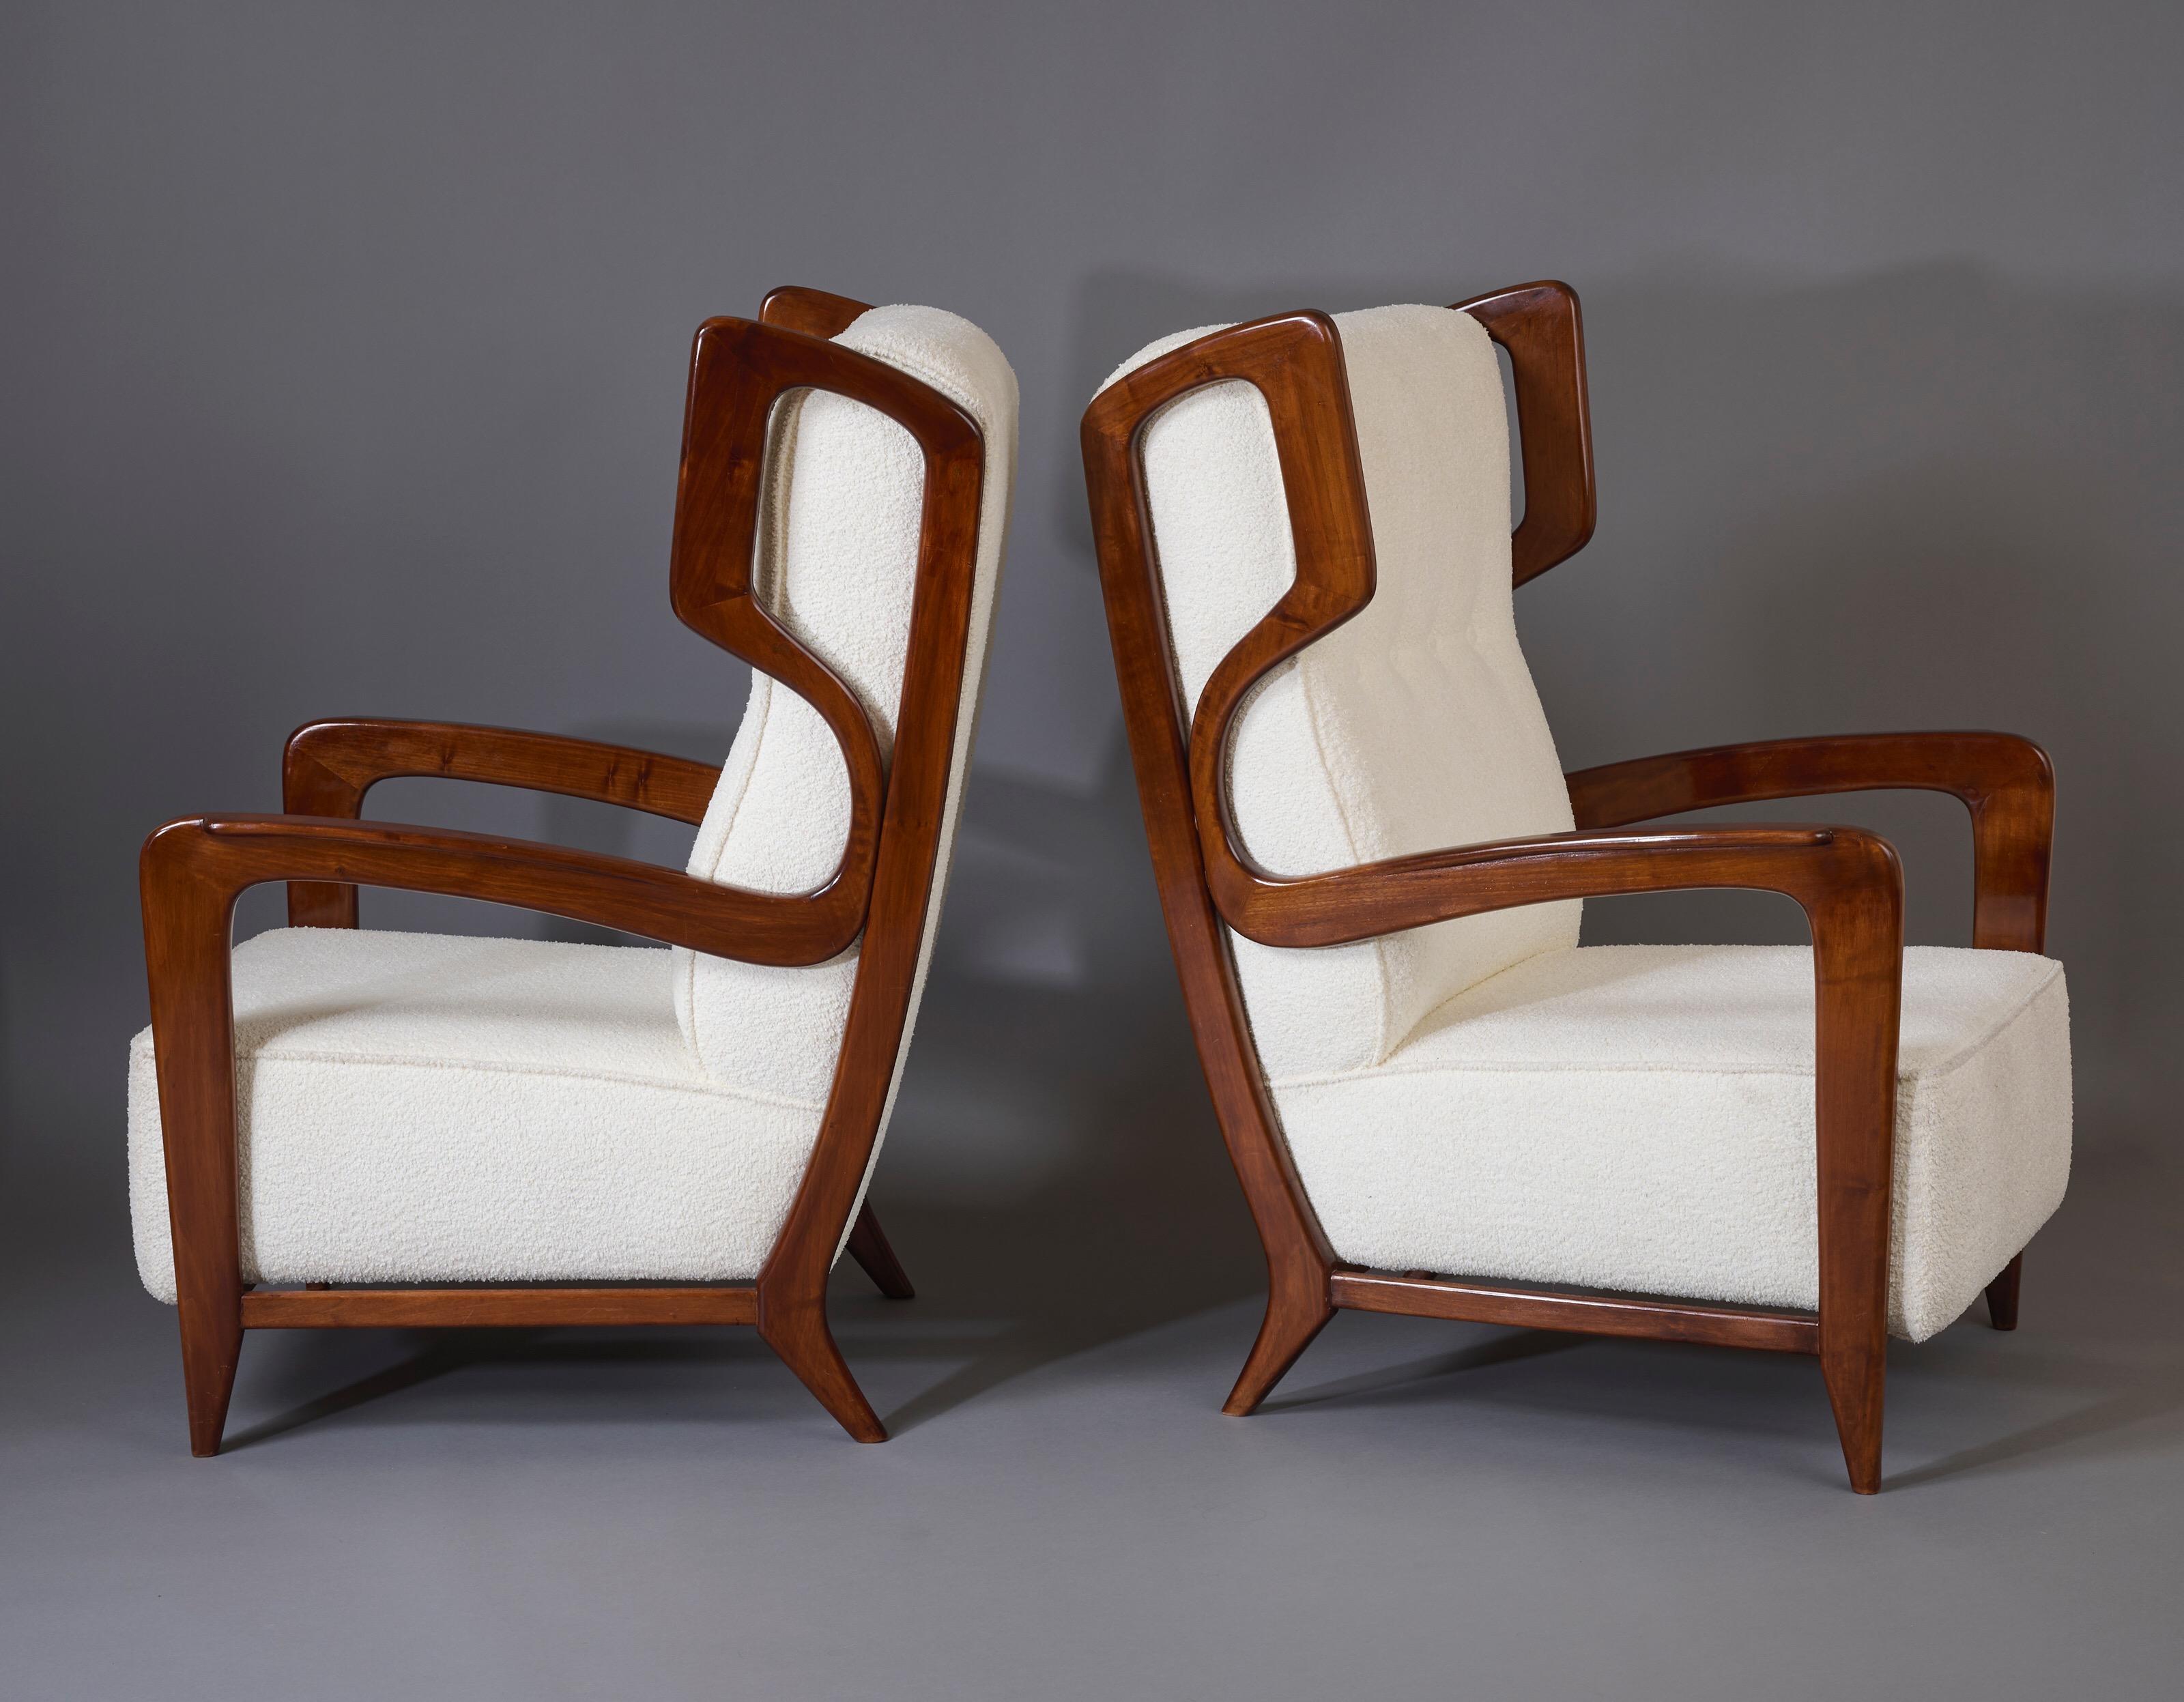 Italian Gio Ponti, Exceptional Pair of Rare Wingback Armchairs in Walnut, Italy, 1940s For Sale